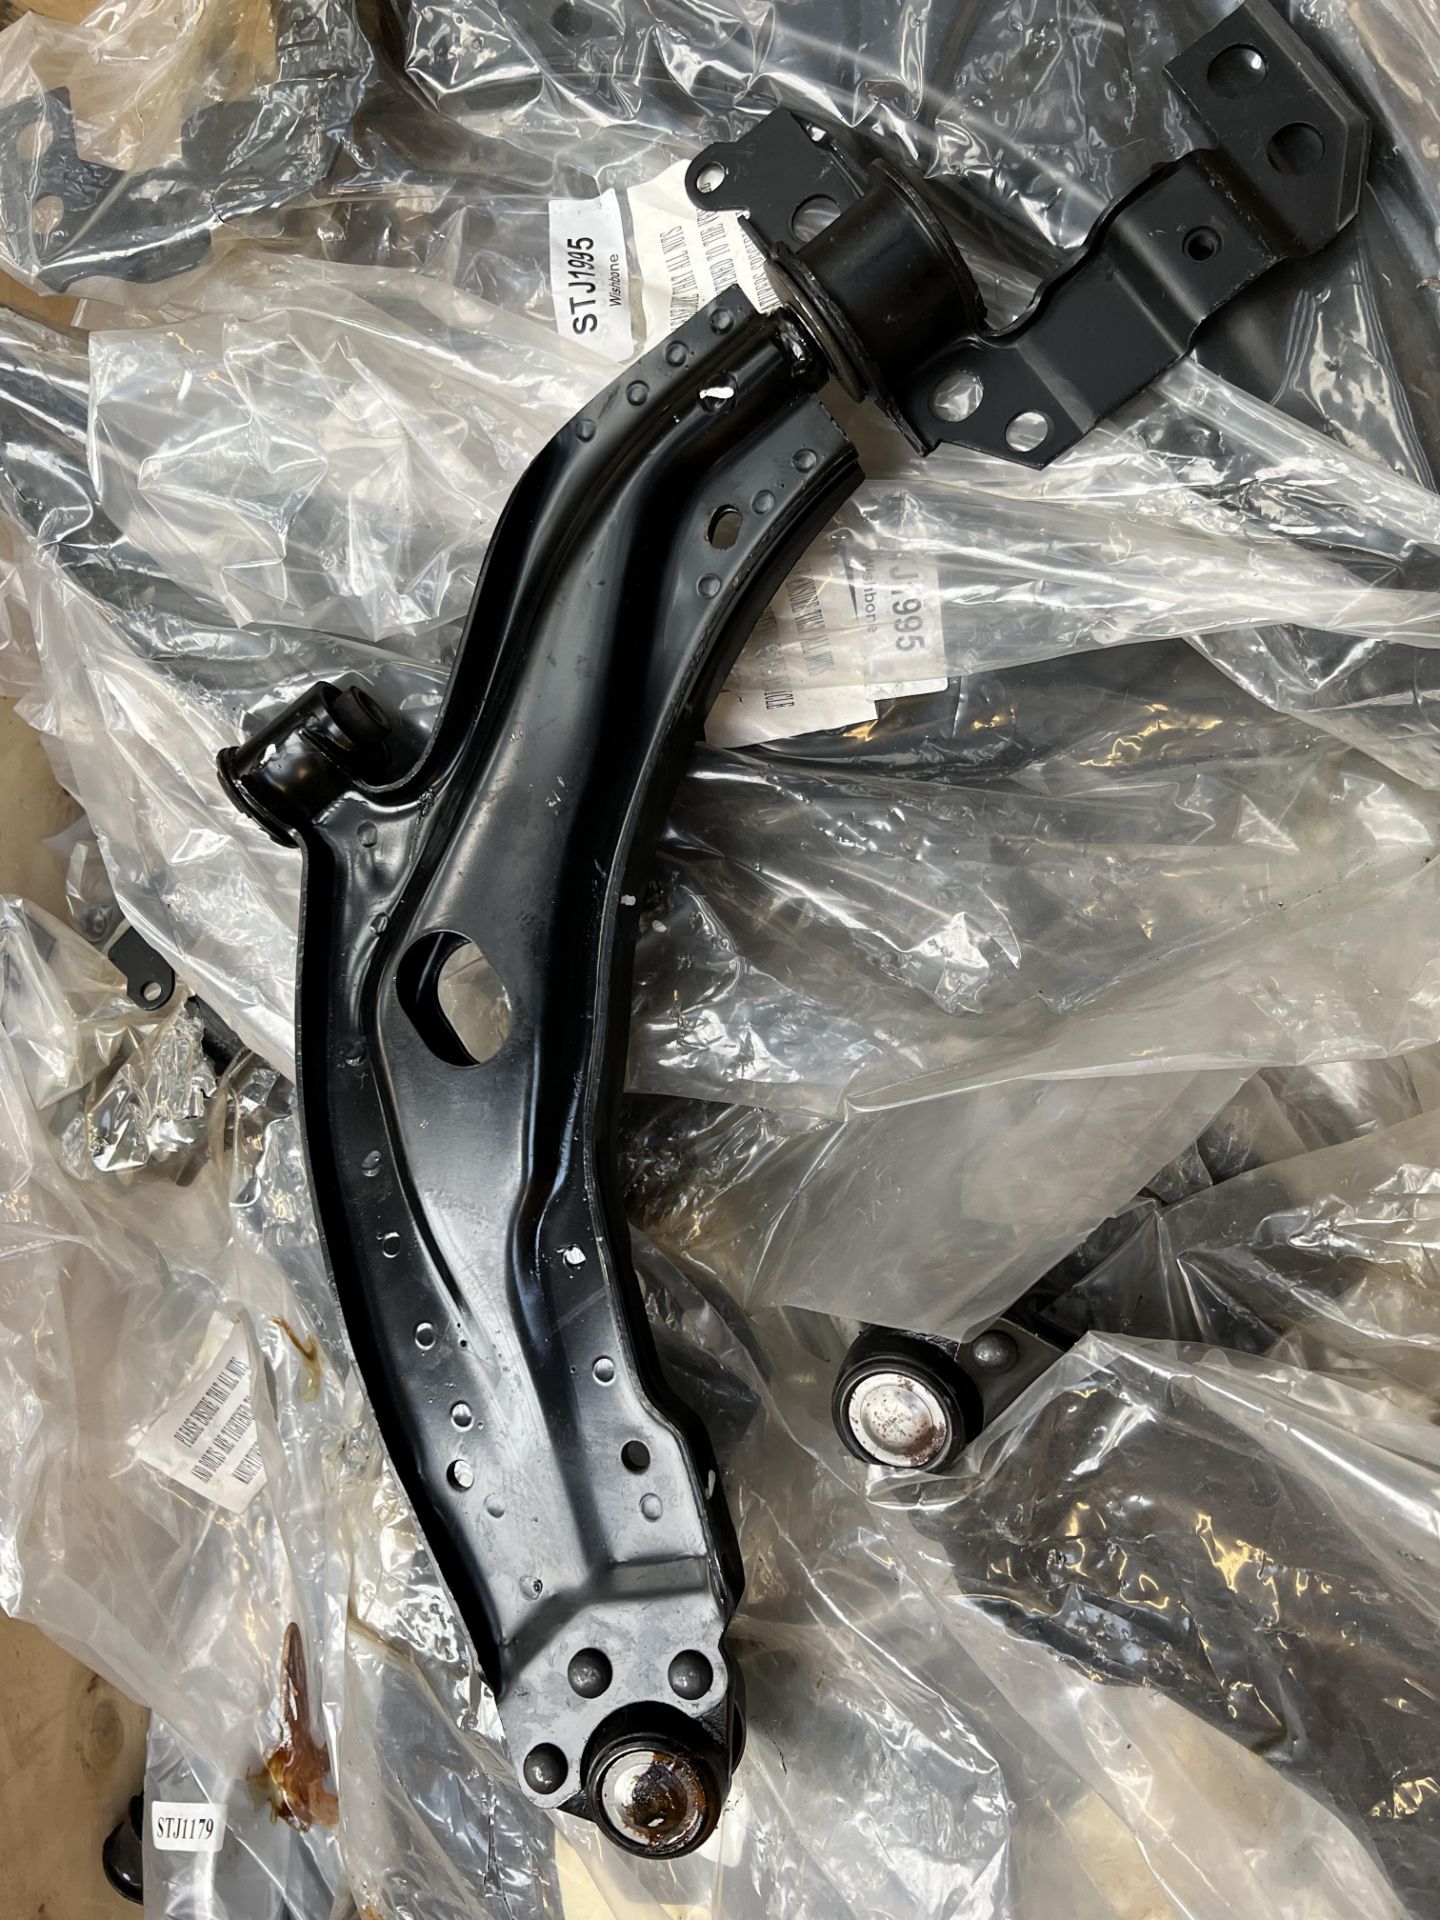 One Crate of approx 91 FCA5582 L/H Suspension Arms for BMW 5 Series - circa £40 online value - Image 3 of 3